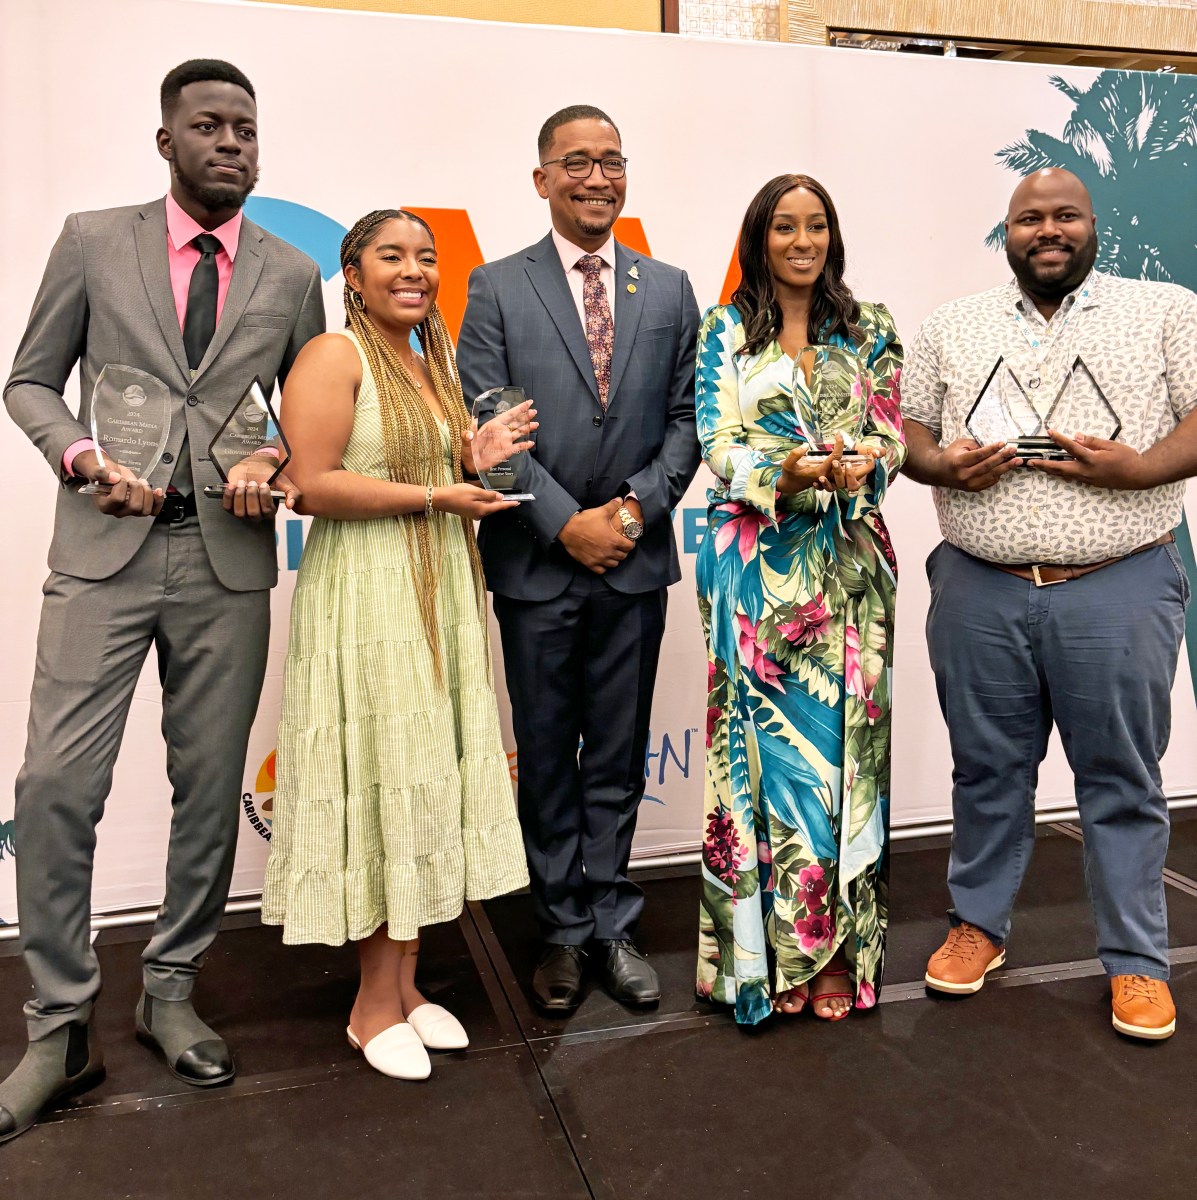 Caribbean Media Awards: From left, Romardo Lyons from TVJ Jamaica, Kaitlyn McNab, Teen Vogue, Kenneth Bryan, minister for Tourism & Ports of the Cayman Islands, Melissa Noel, ESSENCE and Brent Pinheiro of the Trinidad Guardian.